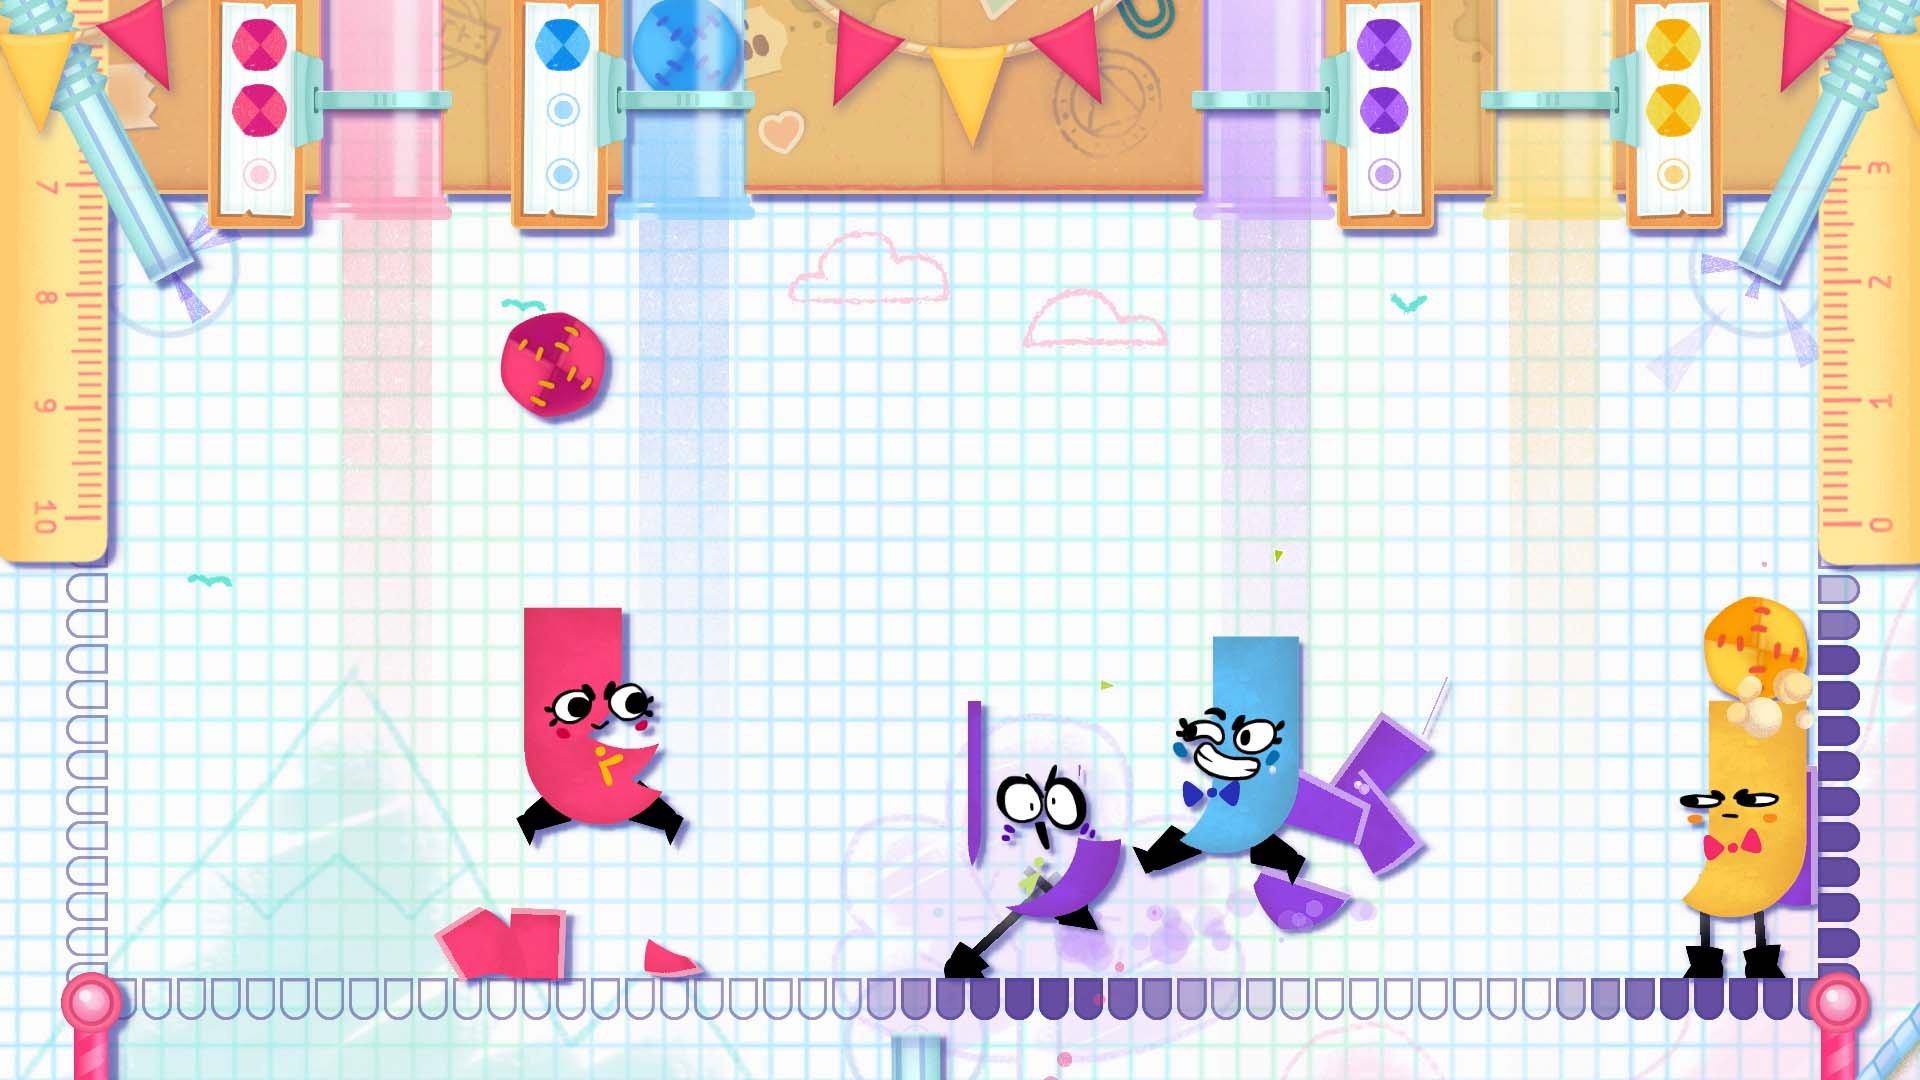 nintendo snipperclips plus